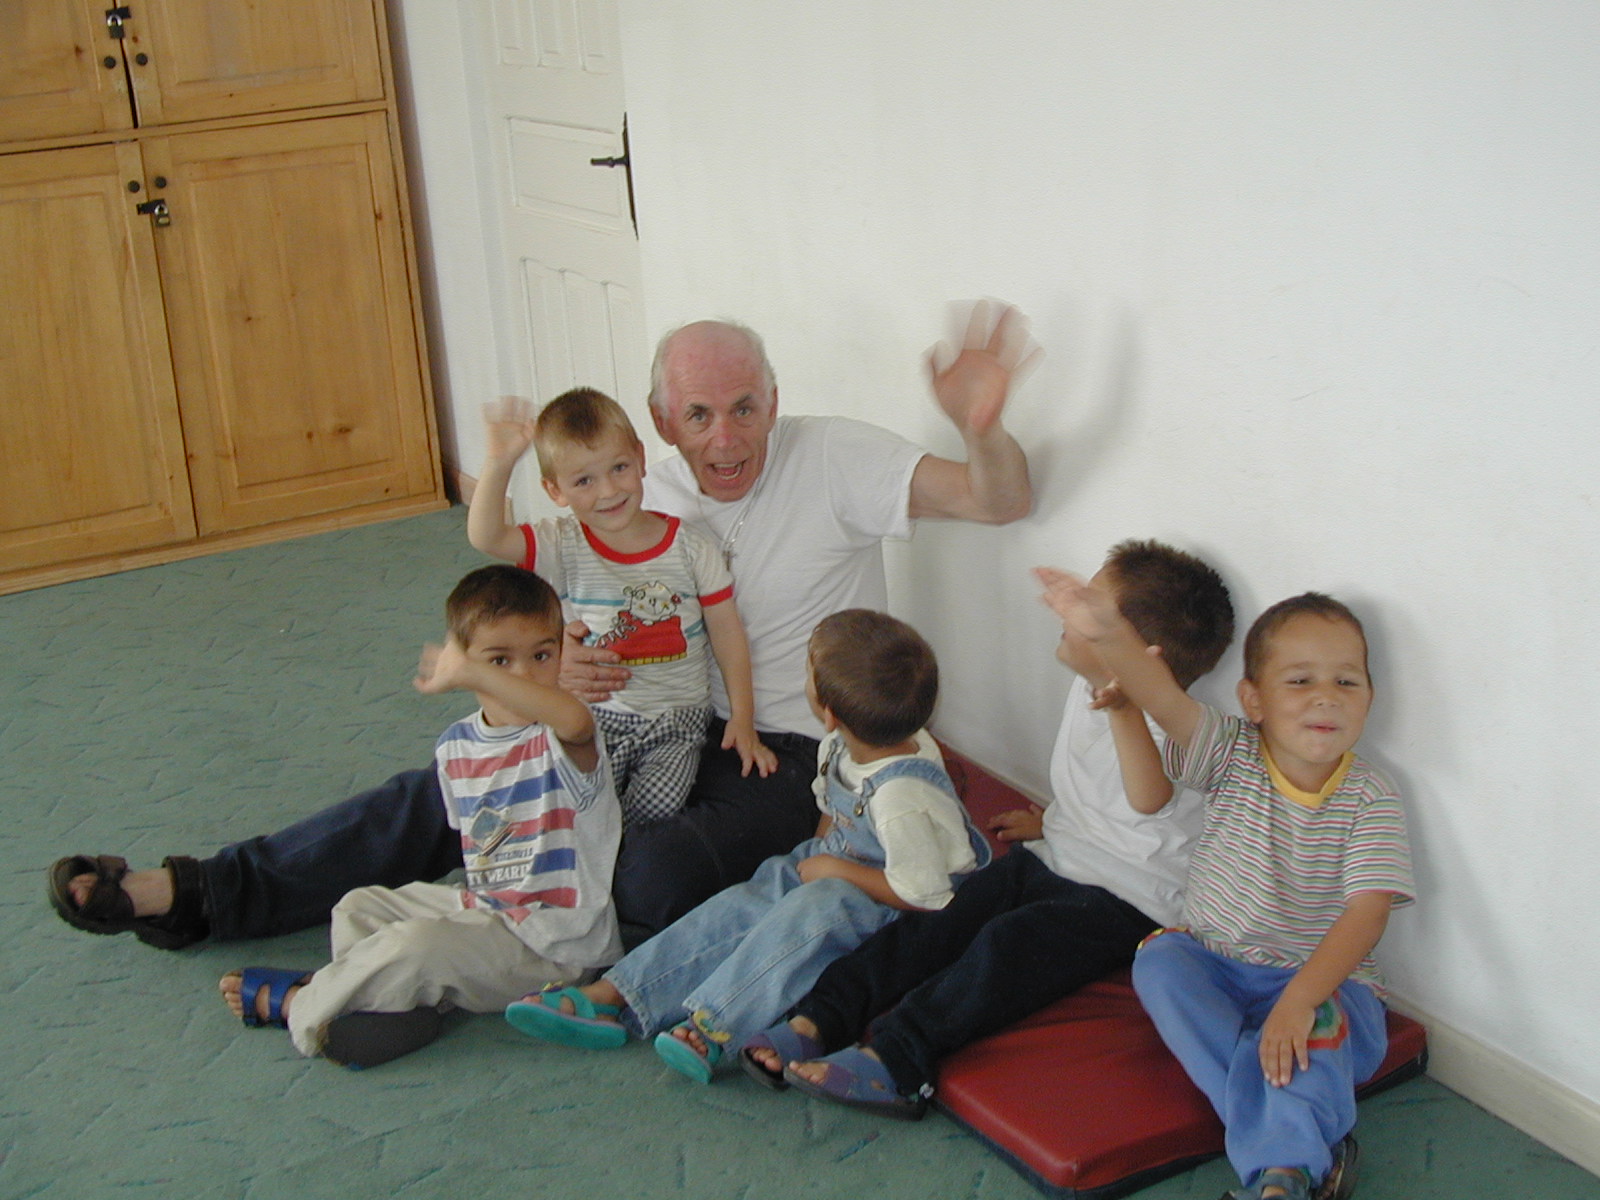 Another photo of Fr. John with children in the playroom at the orphanage.